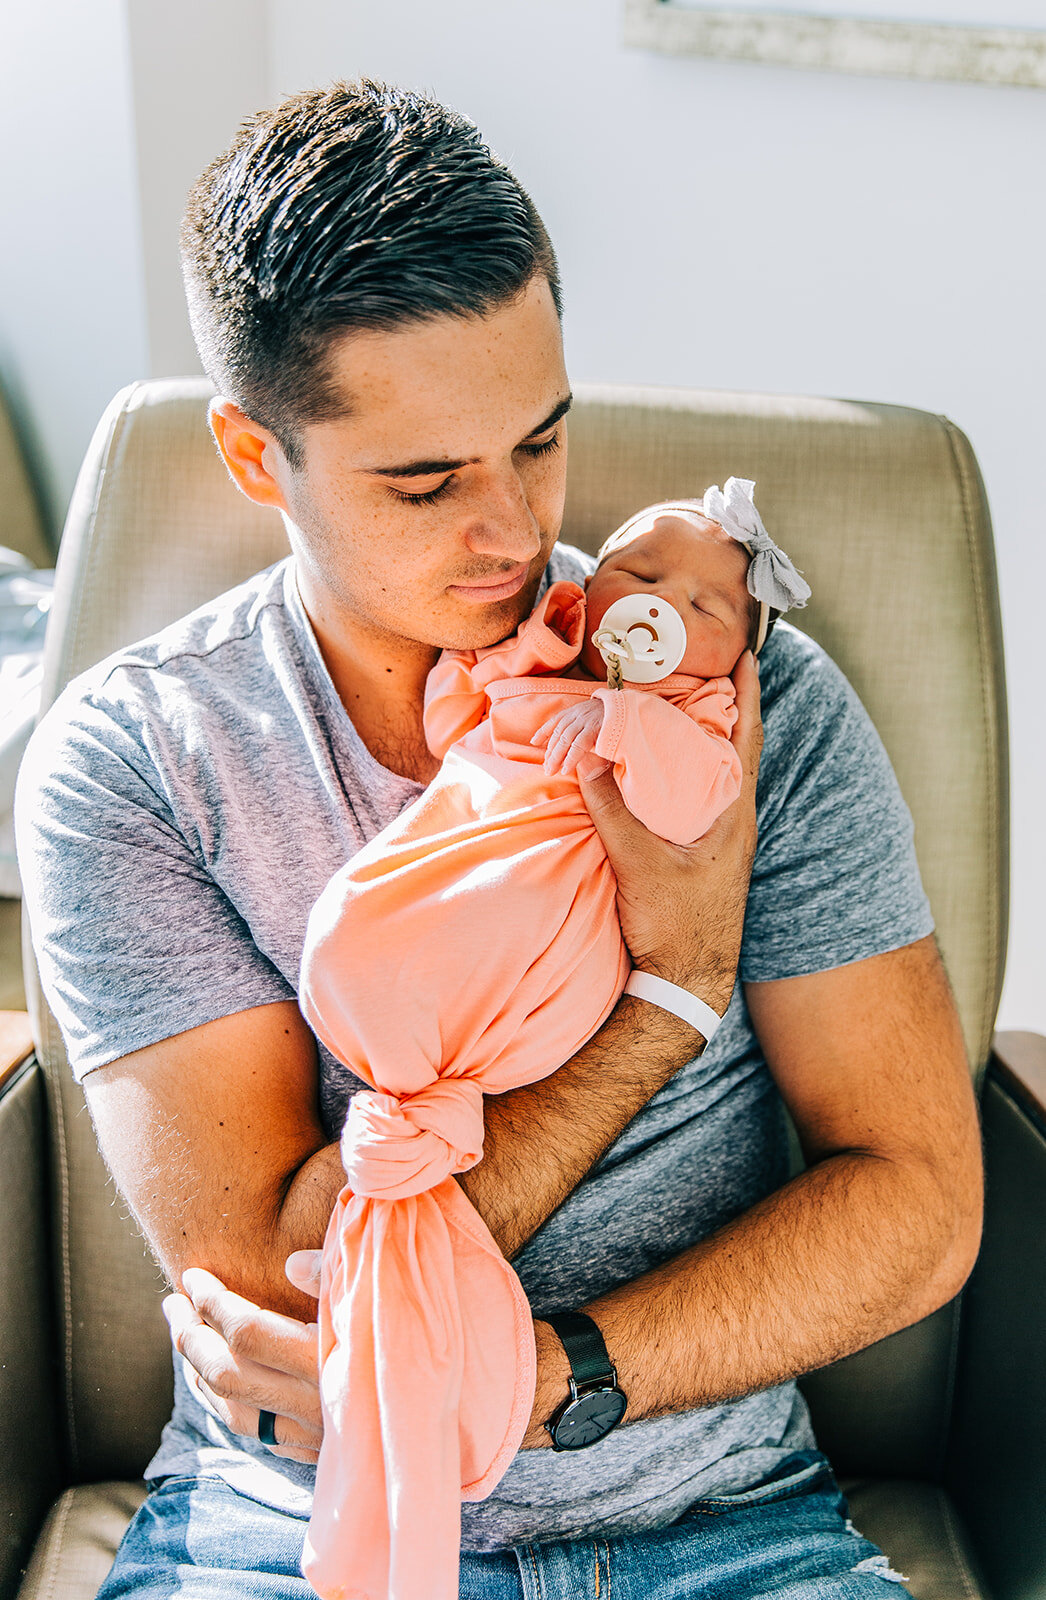  birth story picture of baby girl with a binky in her mouth pink swaddle picture with daddy first time dad hospital fresh 48 session after the baby is born it’s a girl baby girl with grey headband bow darling pose for newborn photography bella alder 